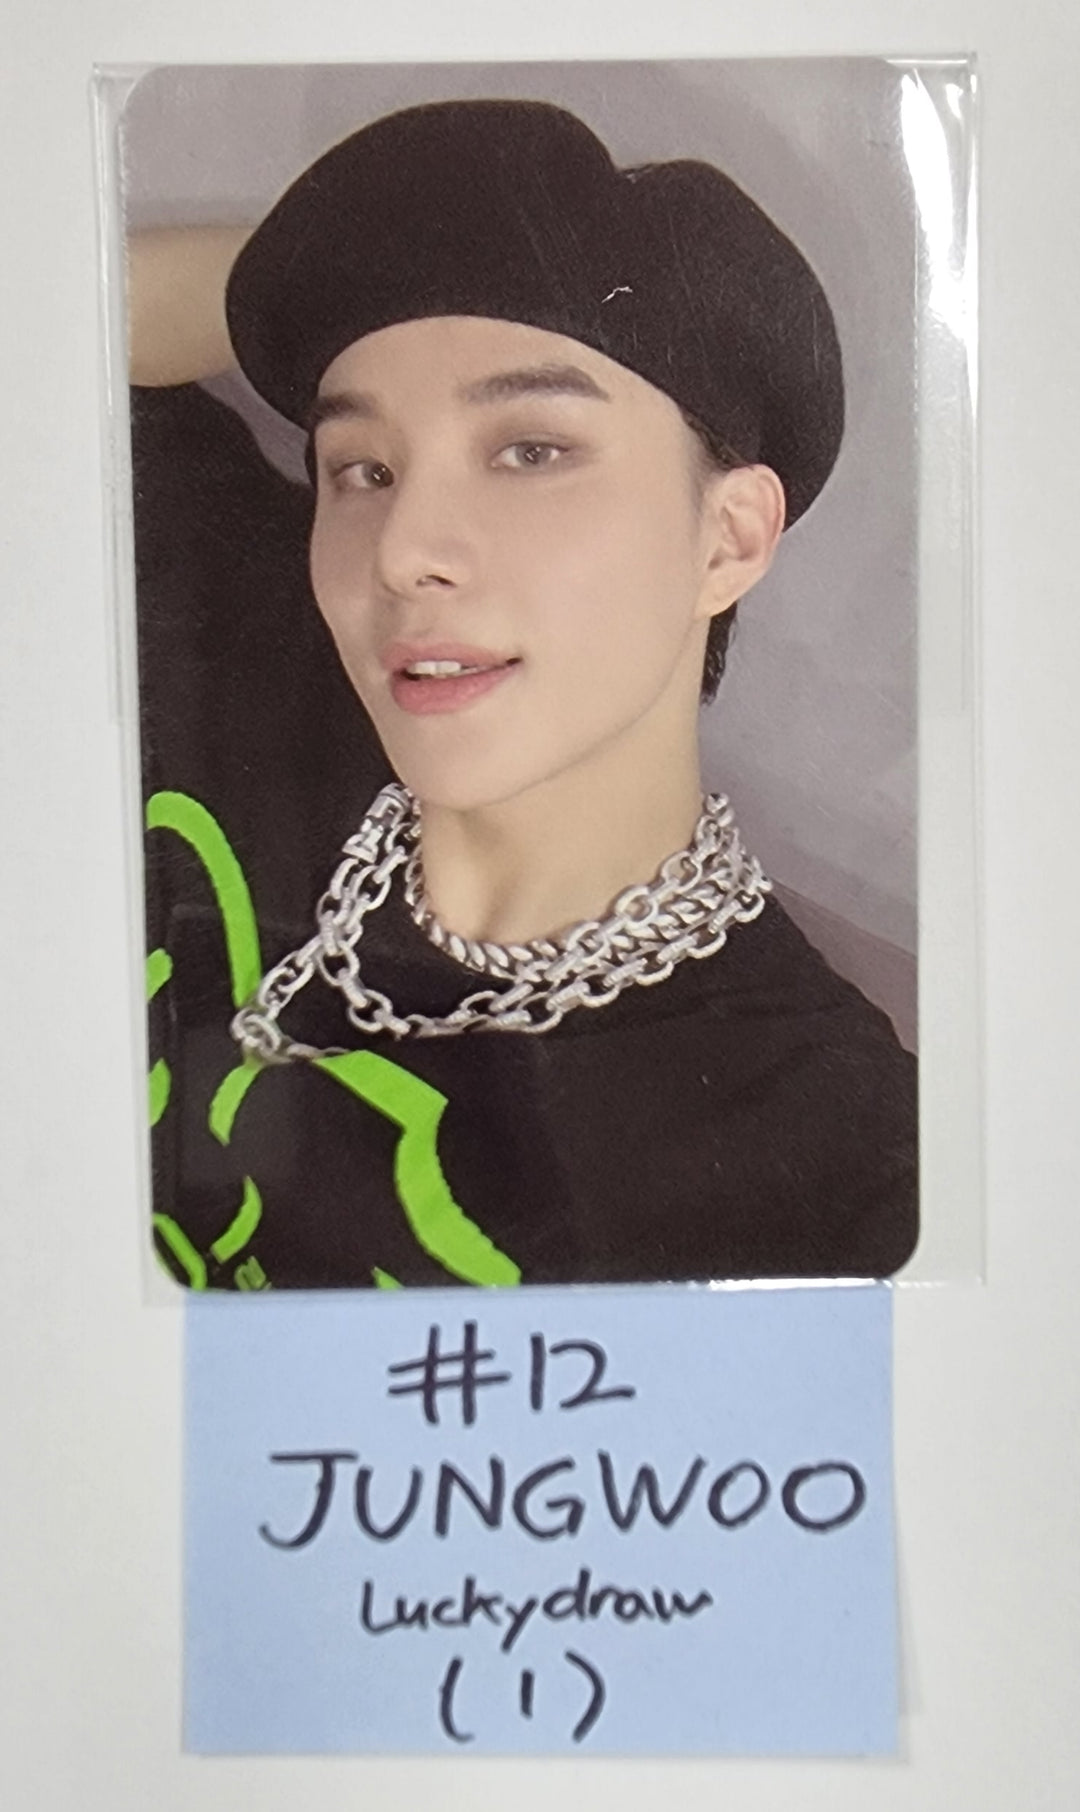 NCT 127 "질주 Street" - SM Store Lucky Draw Event Photocard